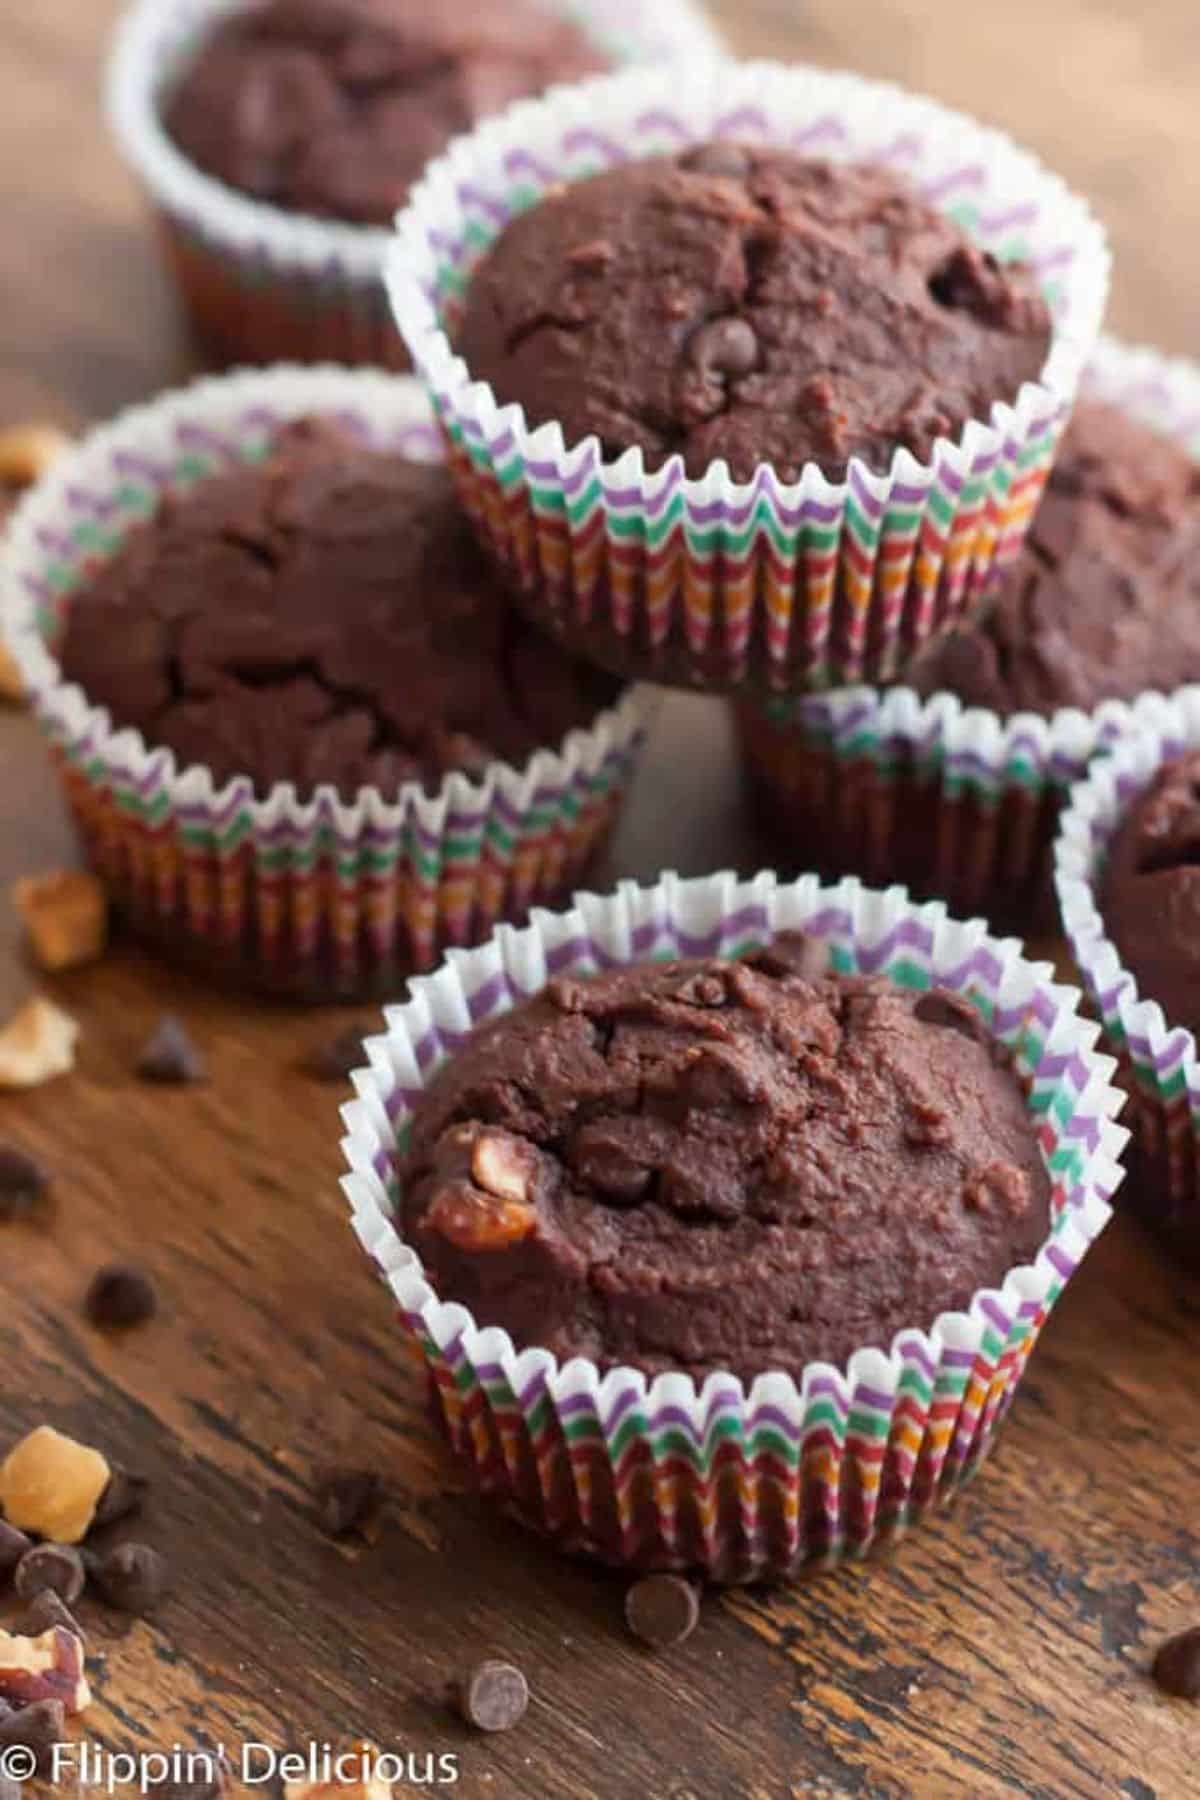 Delicious Gluten-Free Chocolate Hazelnut Muffins on a wooden table.